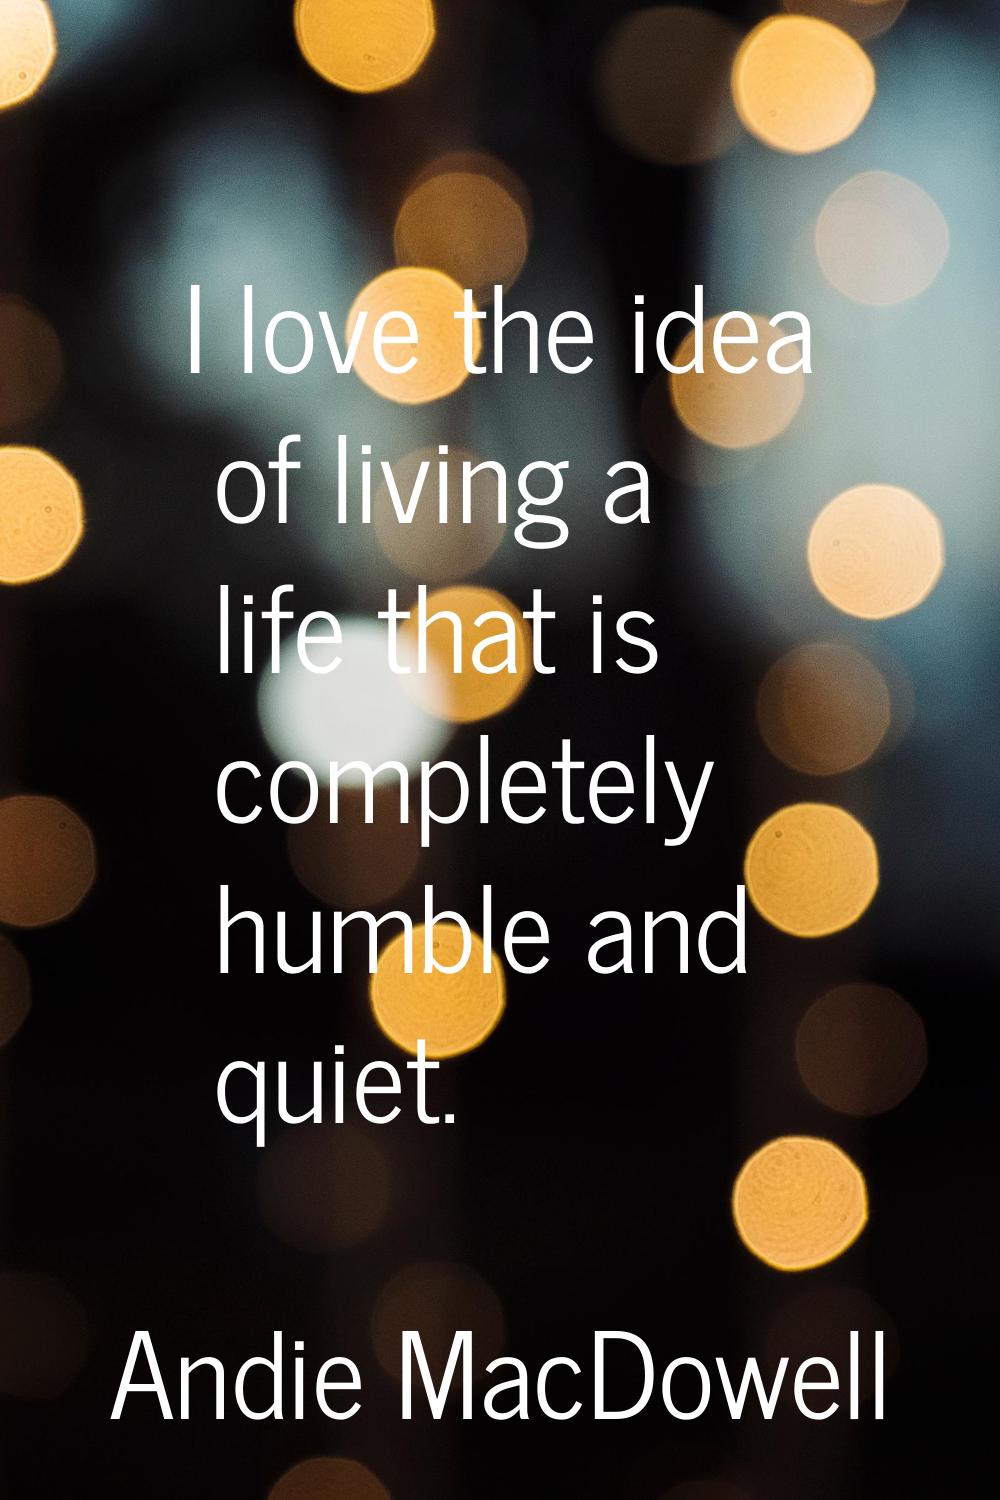 I love the idea of living a life that is completely humble and quiet.